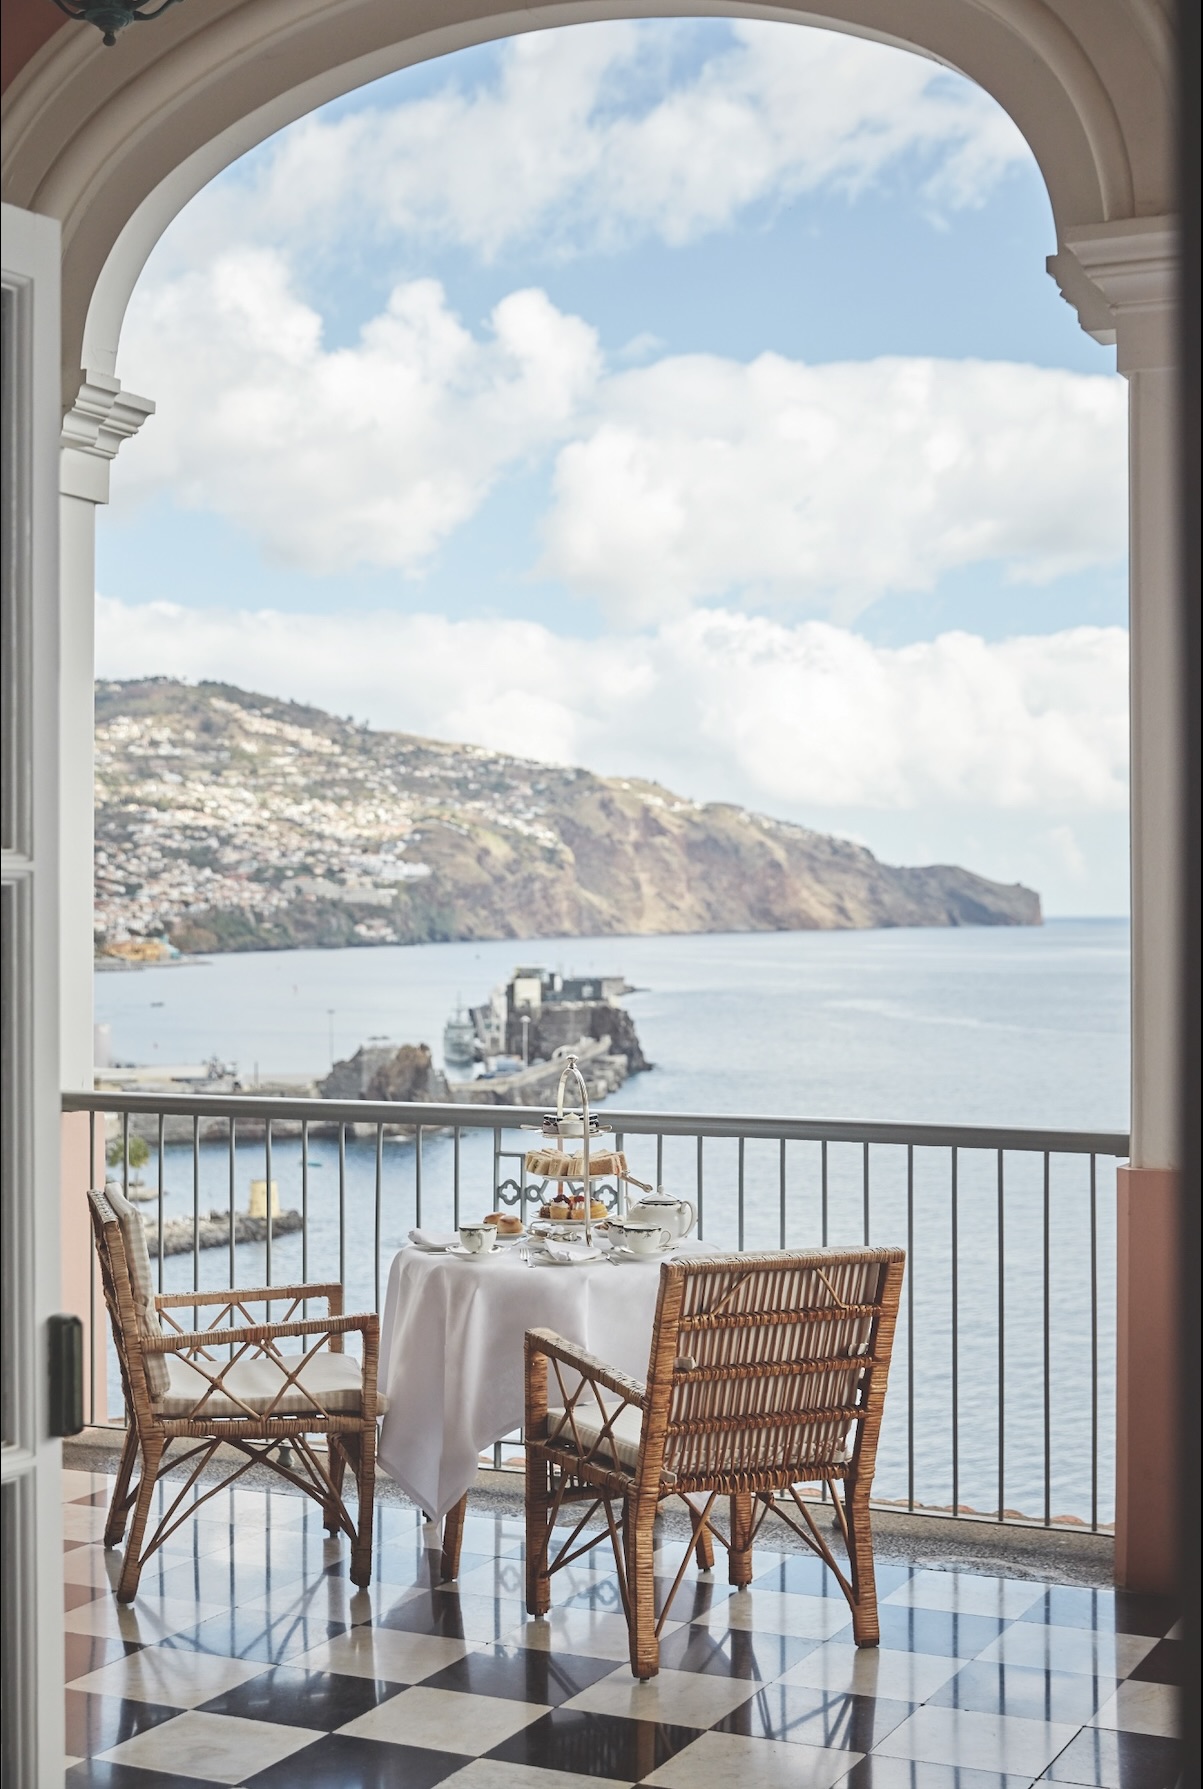 Afternoon Tea Time at Reid's Palace, A Belmond Hotel, Madeira